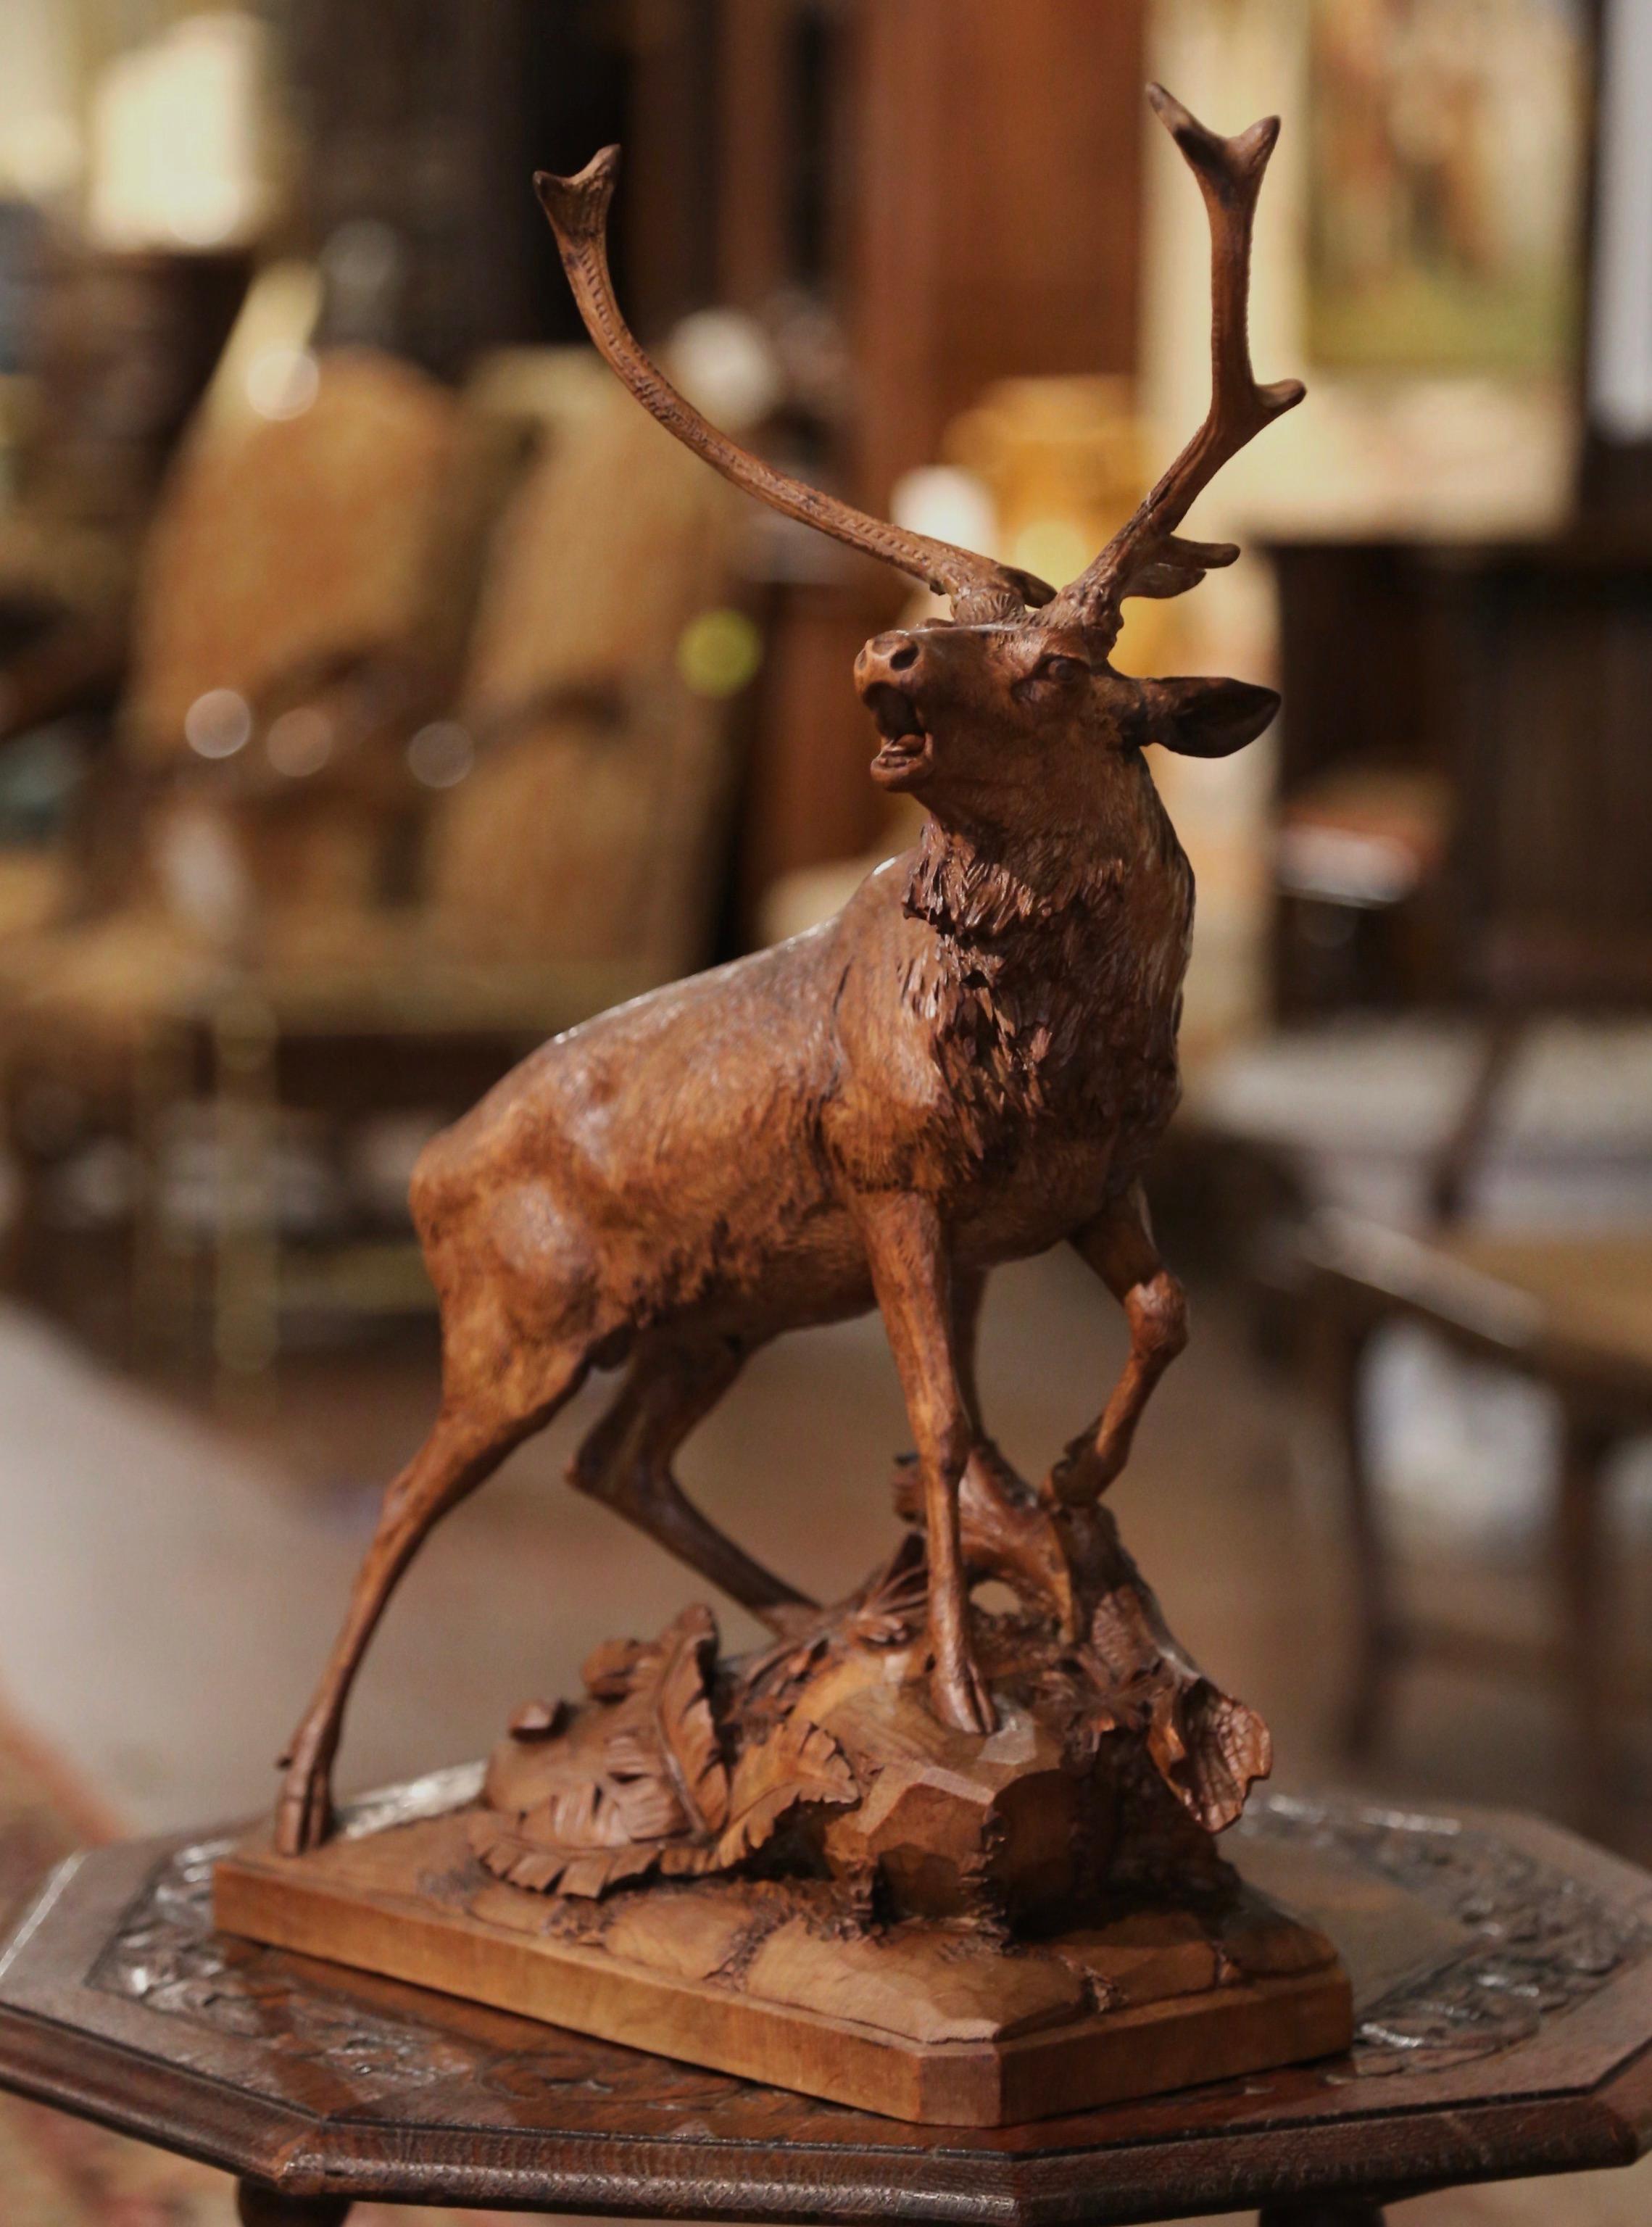 This tall and large antique deer sculpture was created in France, circa 1880. Hand carved in the style of French sculptor Prosper Lecourtier, the detailed walnut piece features a realistic and proud 12 pointer buck roaring at bay while standing on a